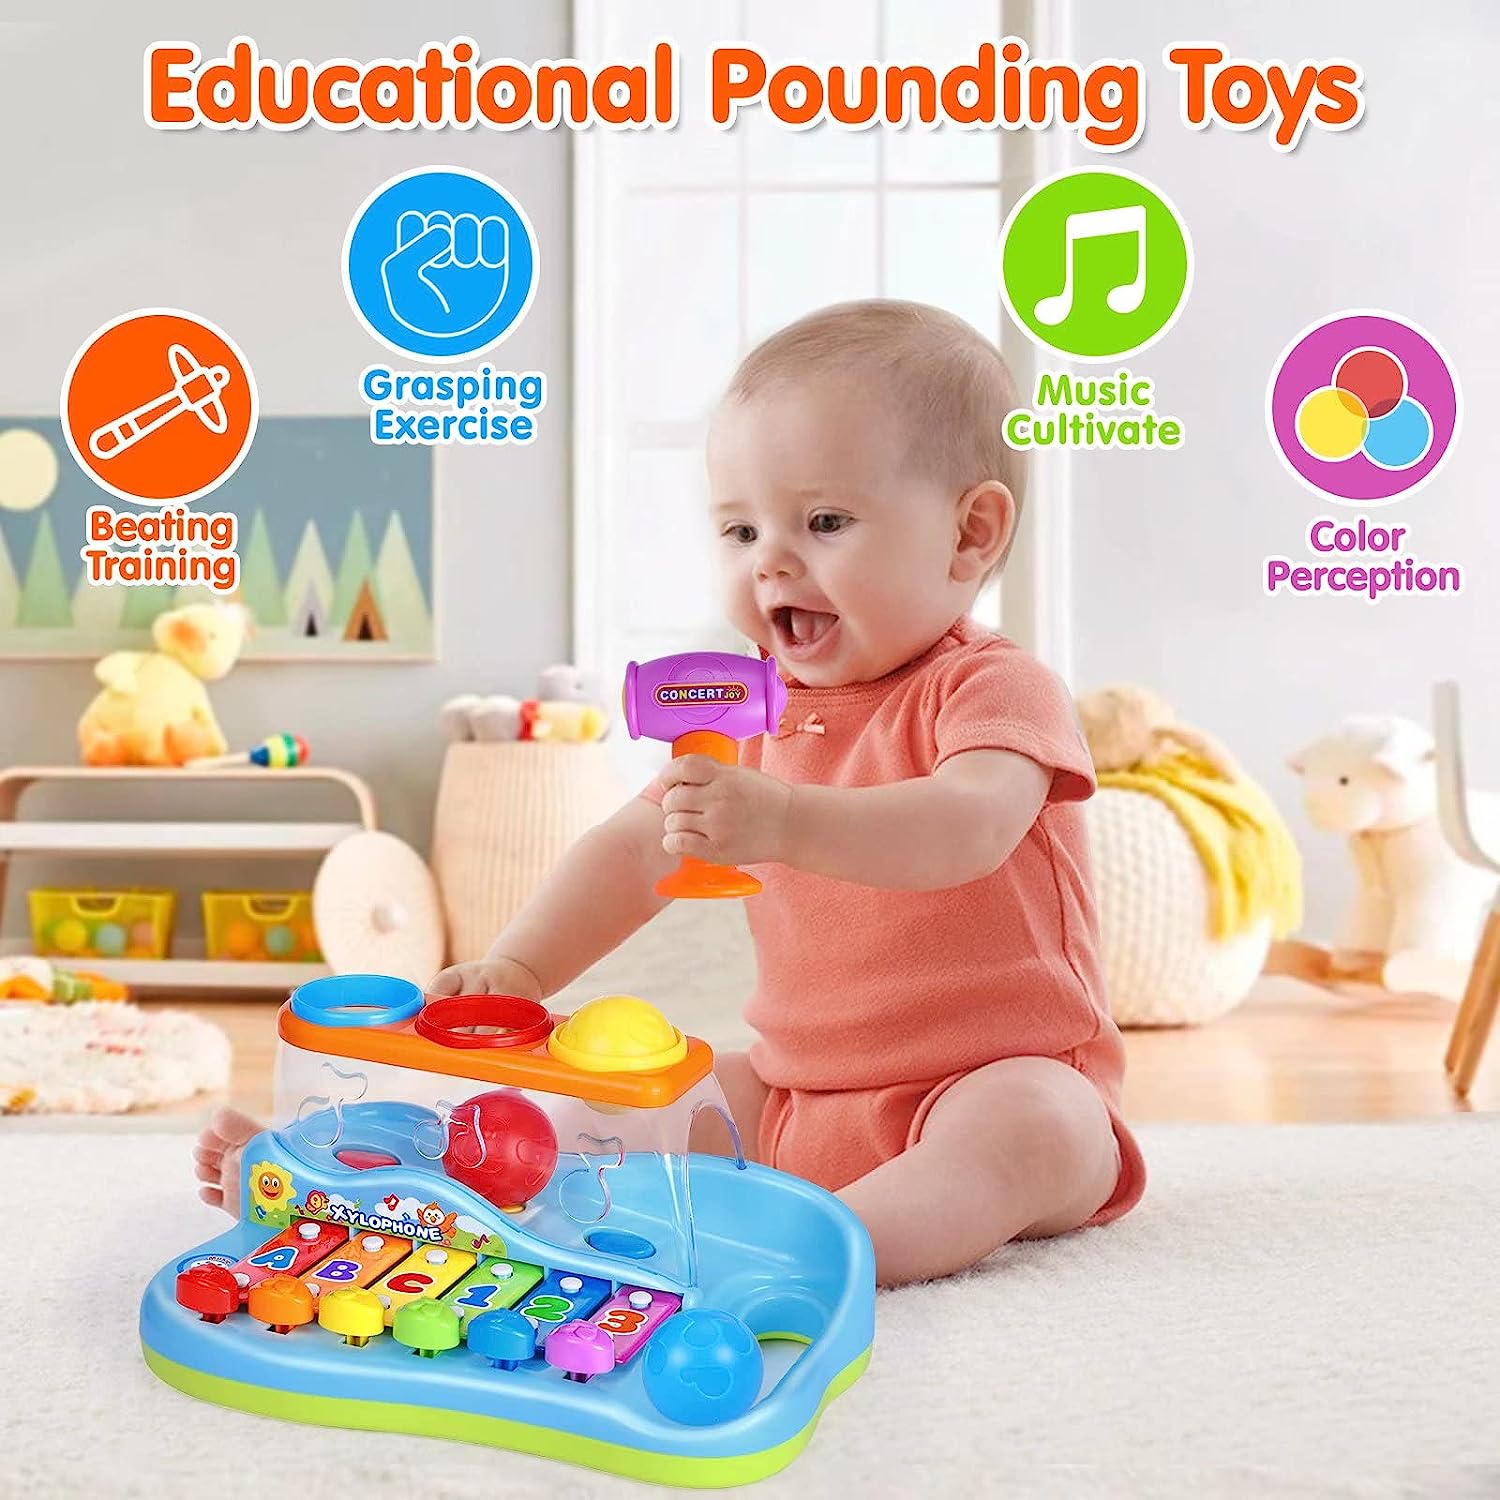 Baby Toys 12 - 18 Months Hammering Pounding Toys Xylophone Piano Music Toys with Balls Educational Toys for 1 Year Old, Chris as Birthday Gifts for Toddler Toys Age 1-2 Baby Boys Girls